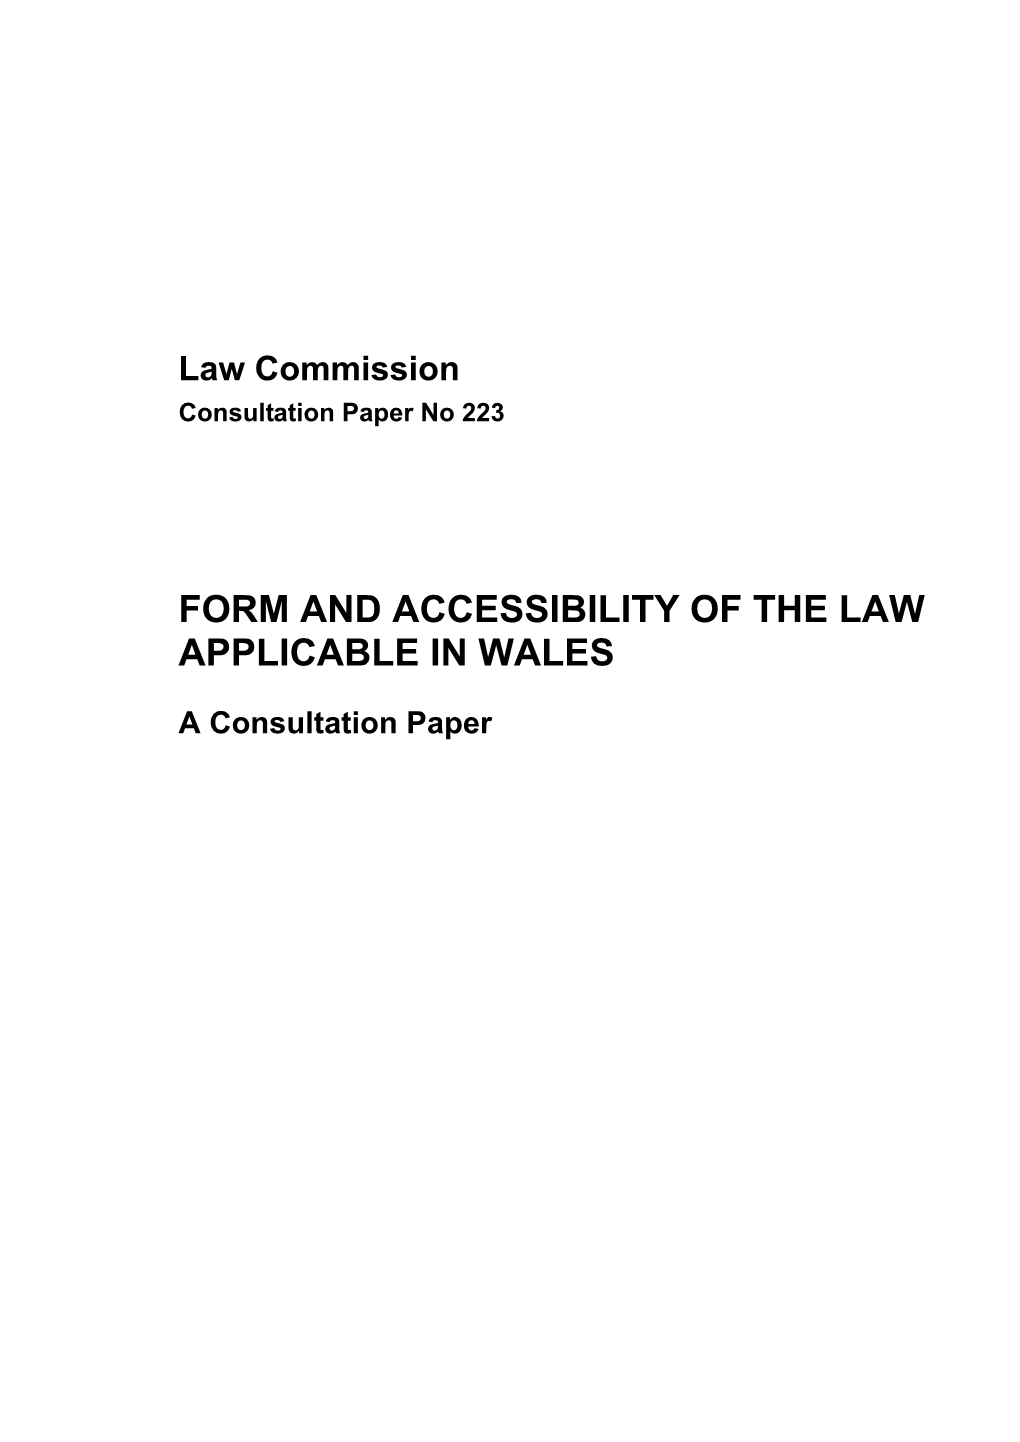 Form and Accessibility of the Law Applicable in Wales